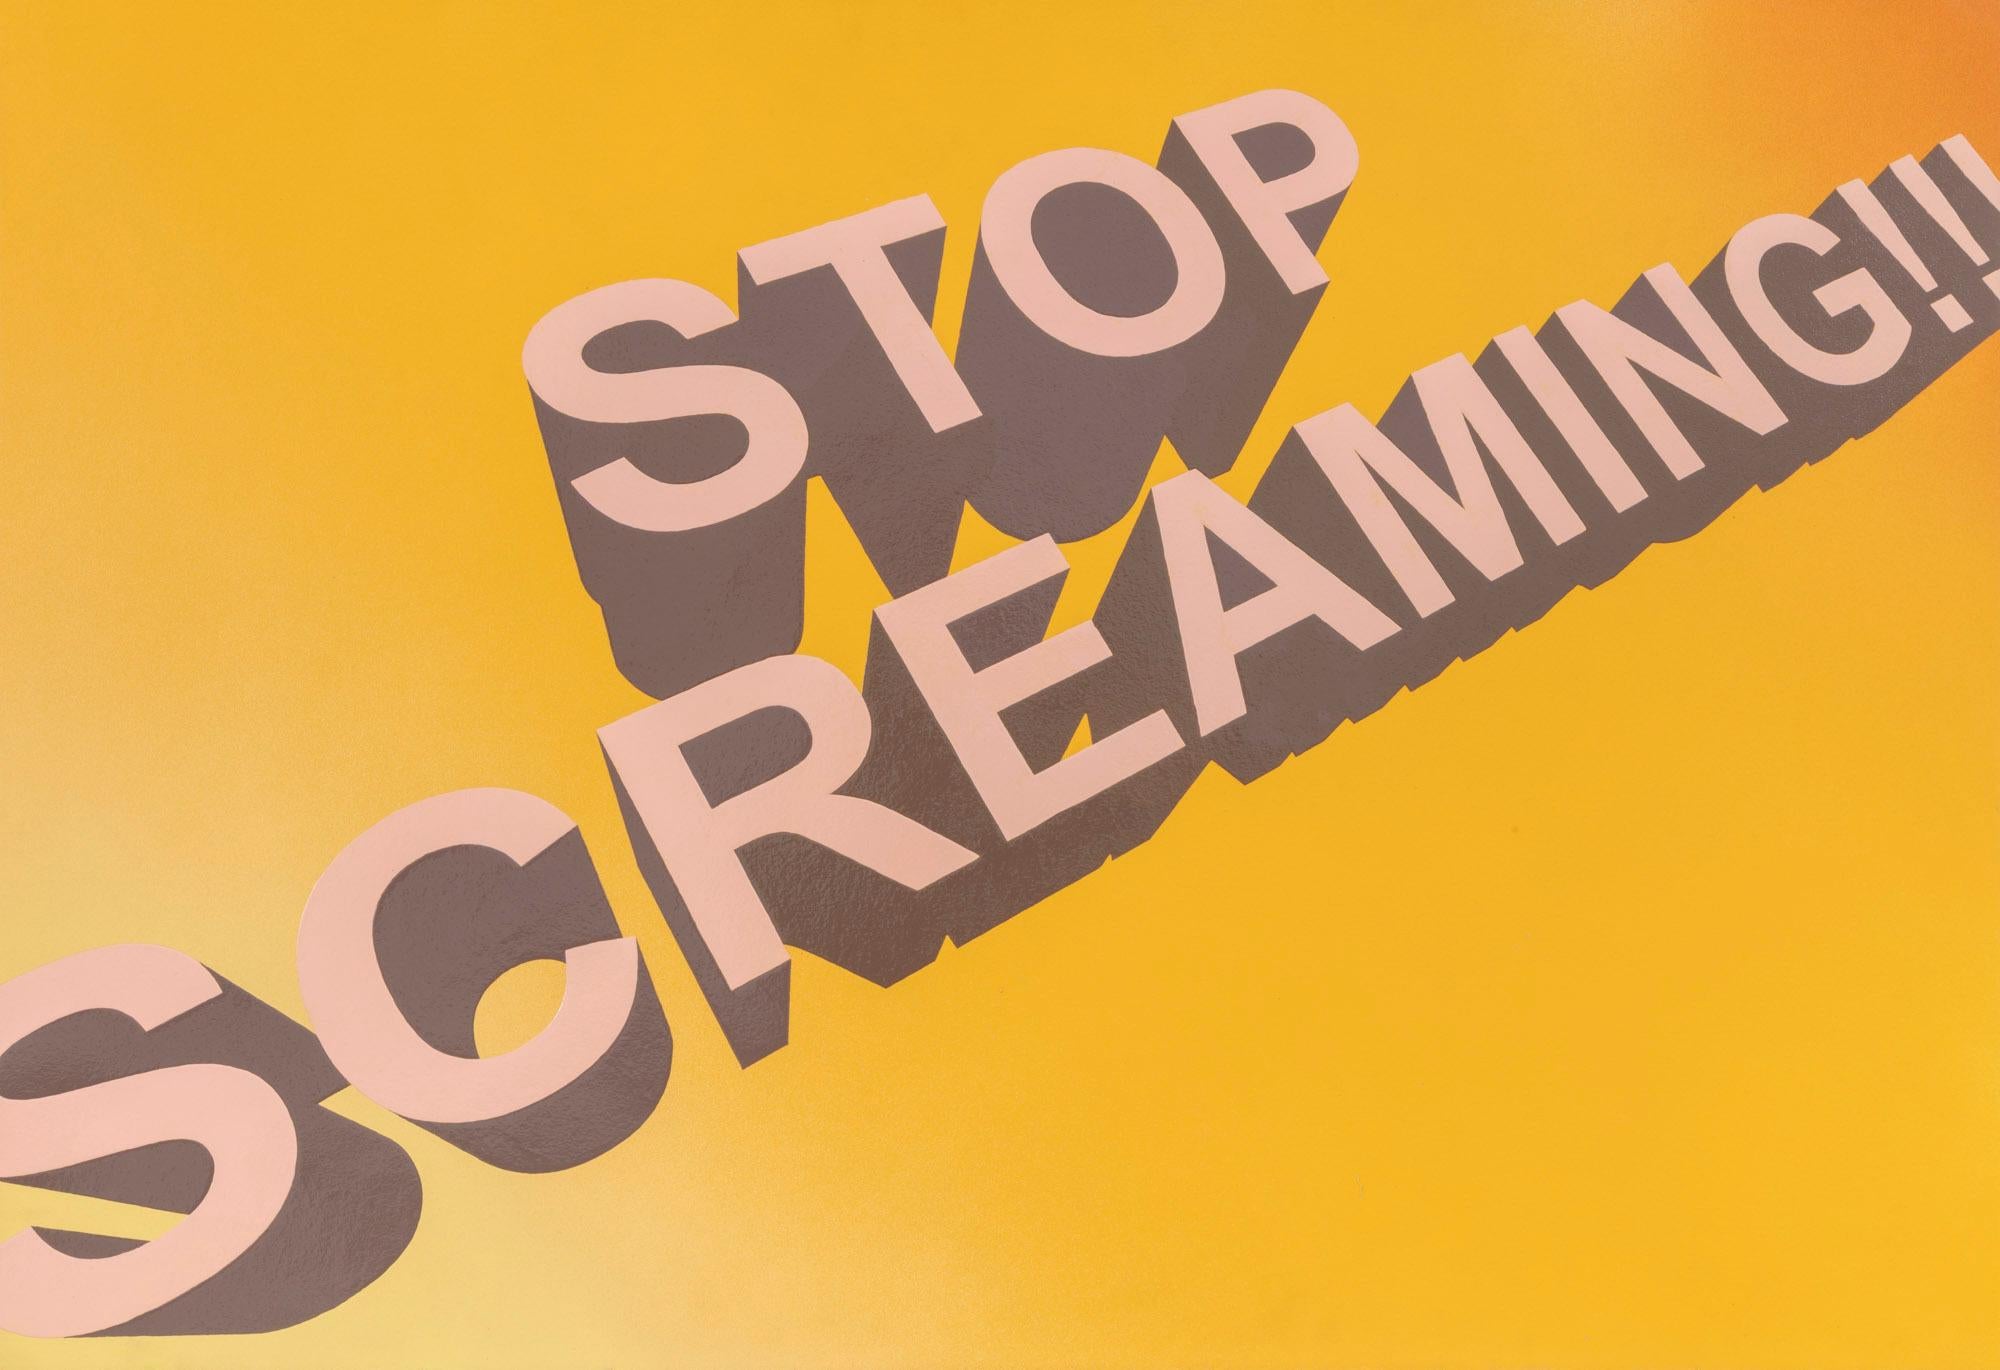 Untitled (Stop Screaming!!!), 2018 is a unique contemporary textual painting on paper. The artist first creates a unique background atmosphere with matte spray paint and then meticulously hand-paints text in his material of choice, nail